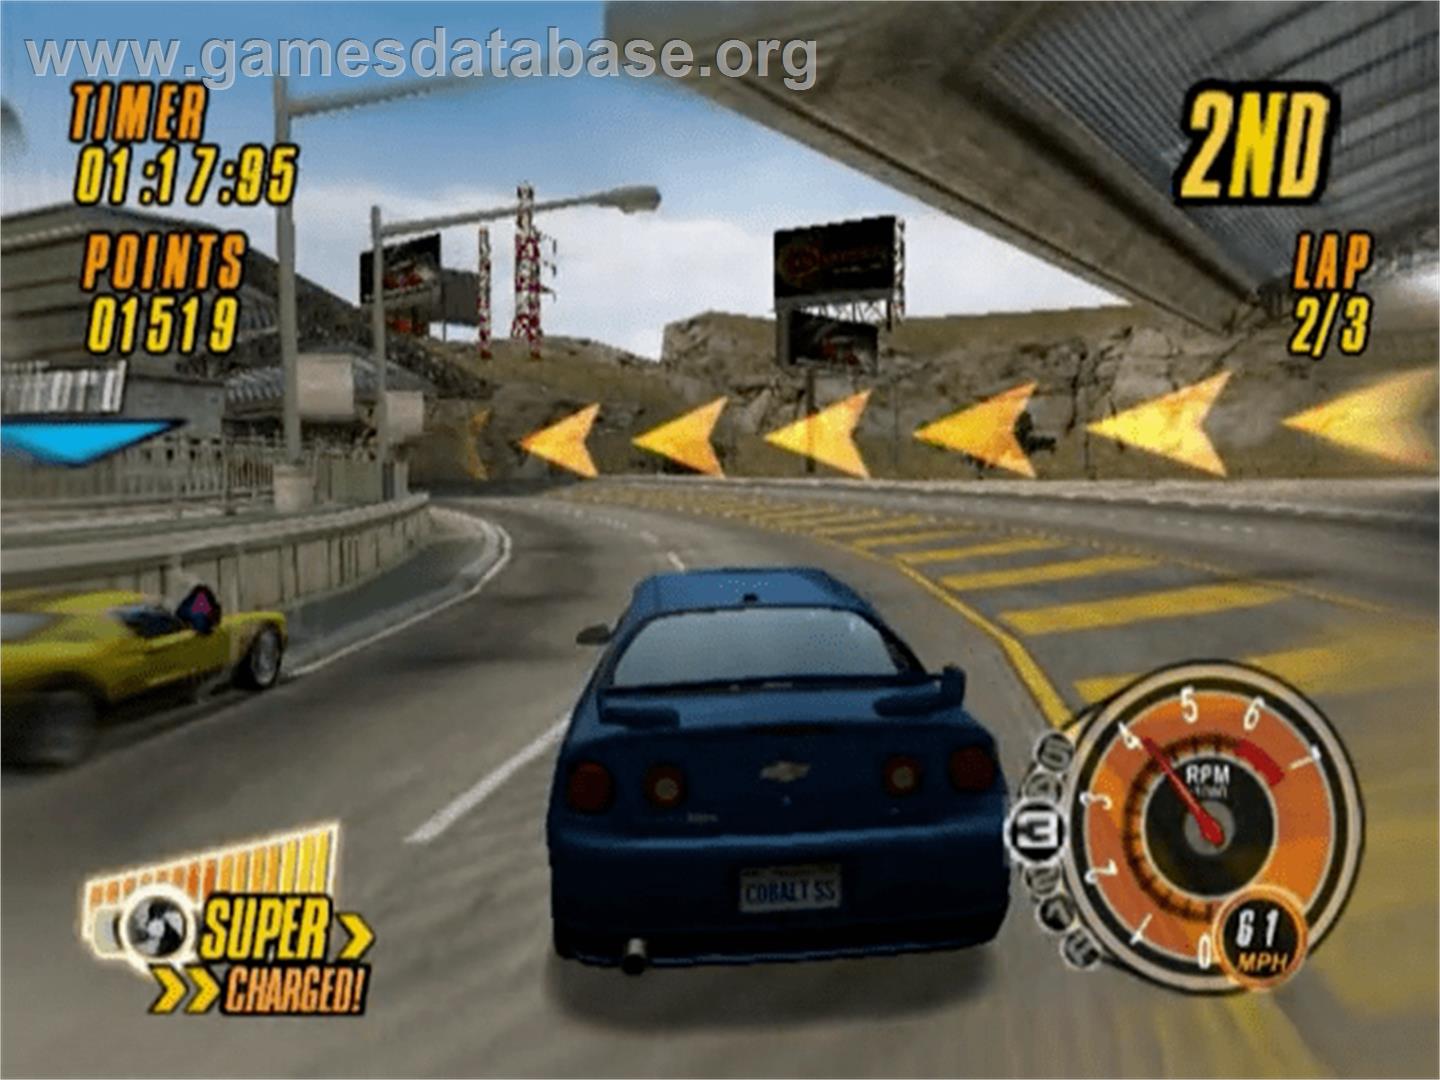 Ford Vs. Chevy - Sony Playstation 2 - Artwork - In Game